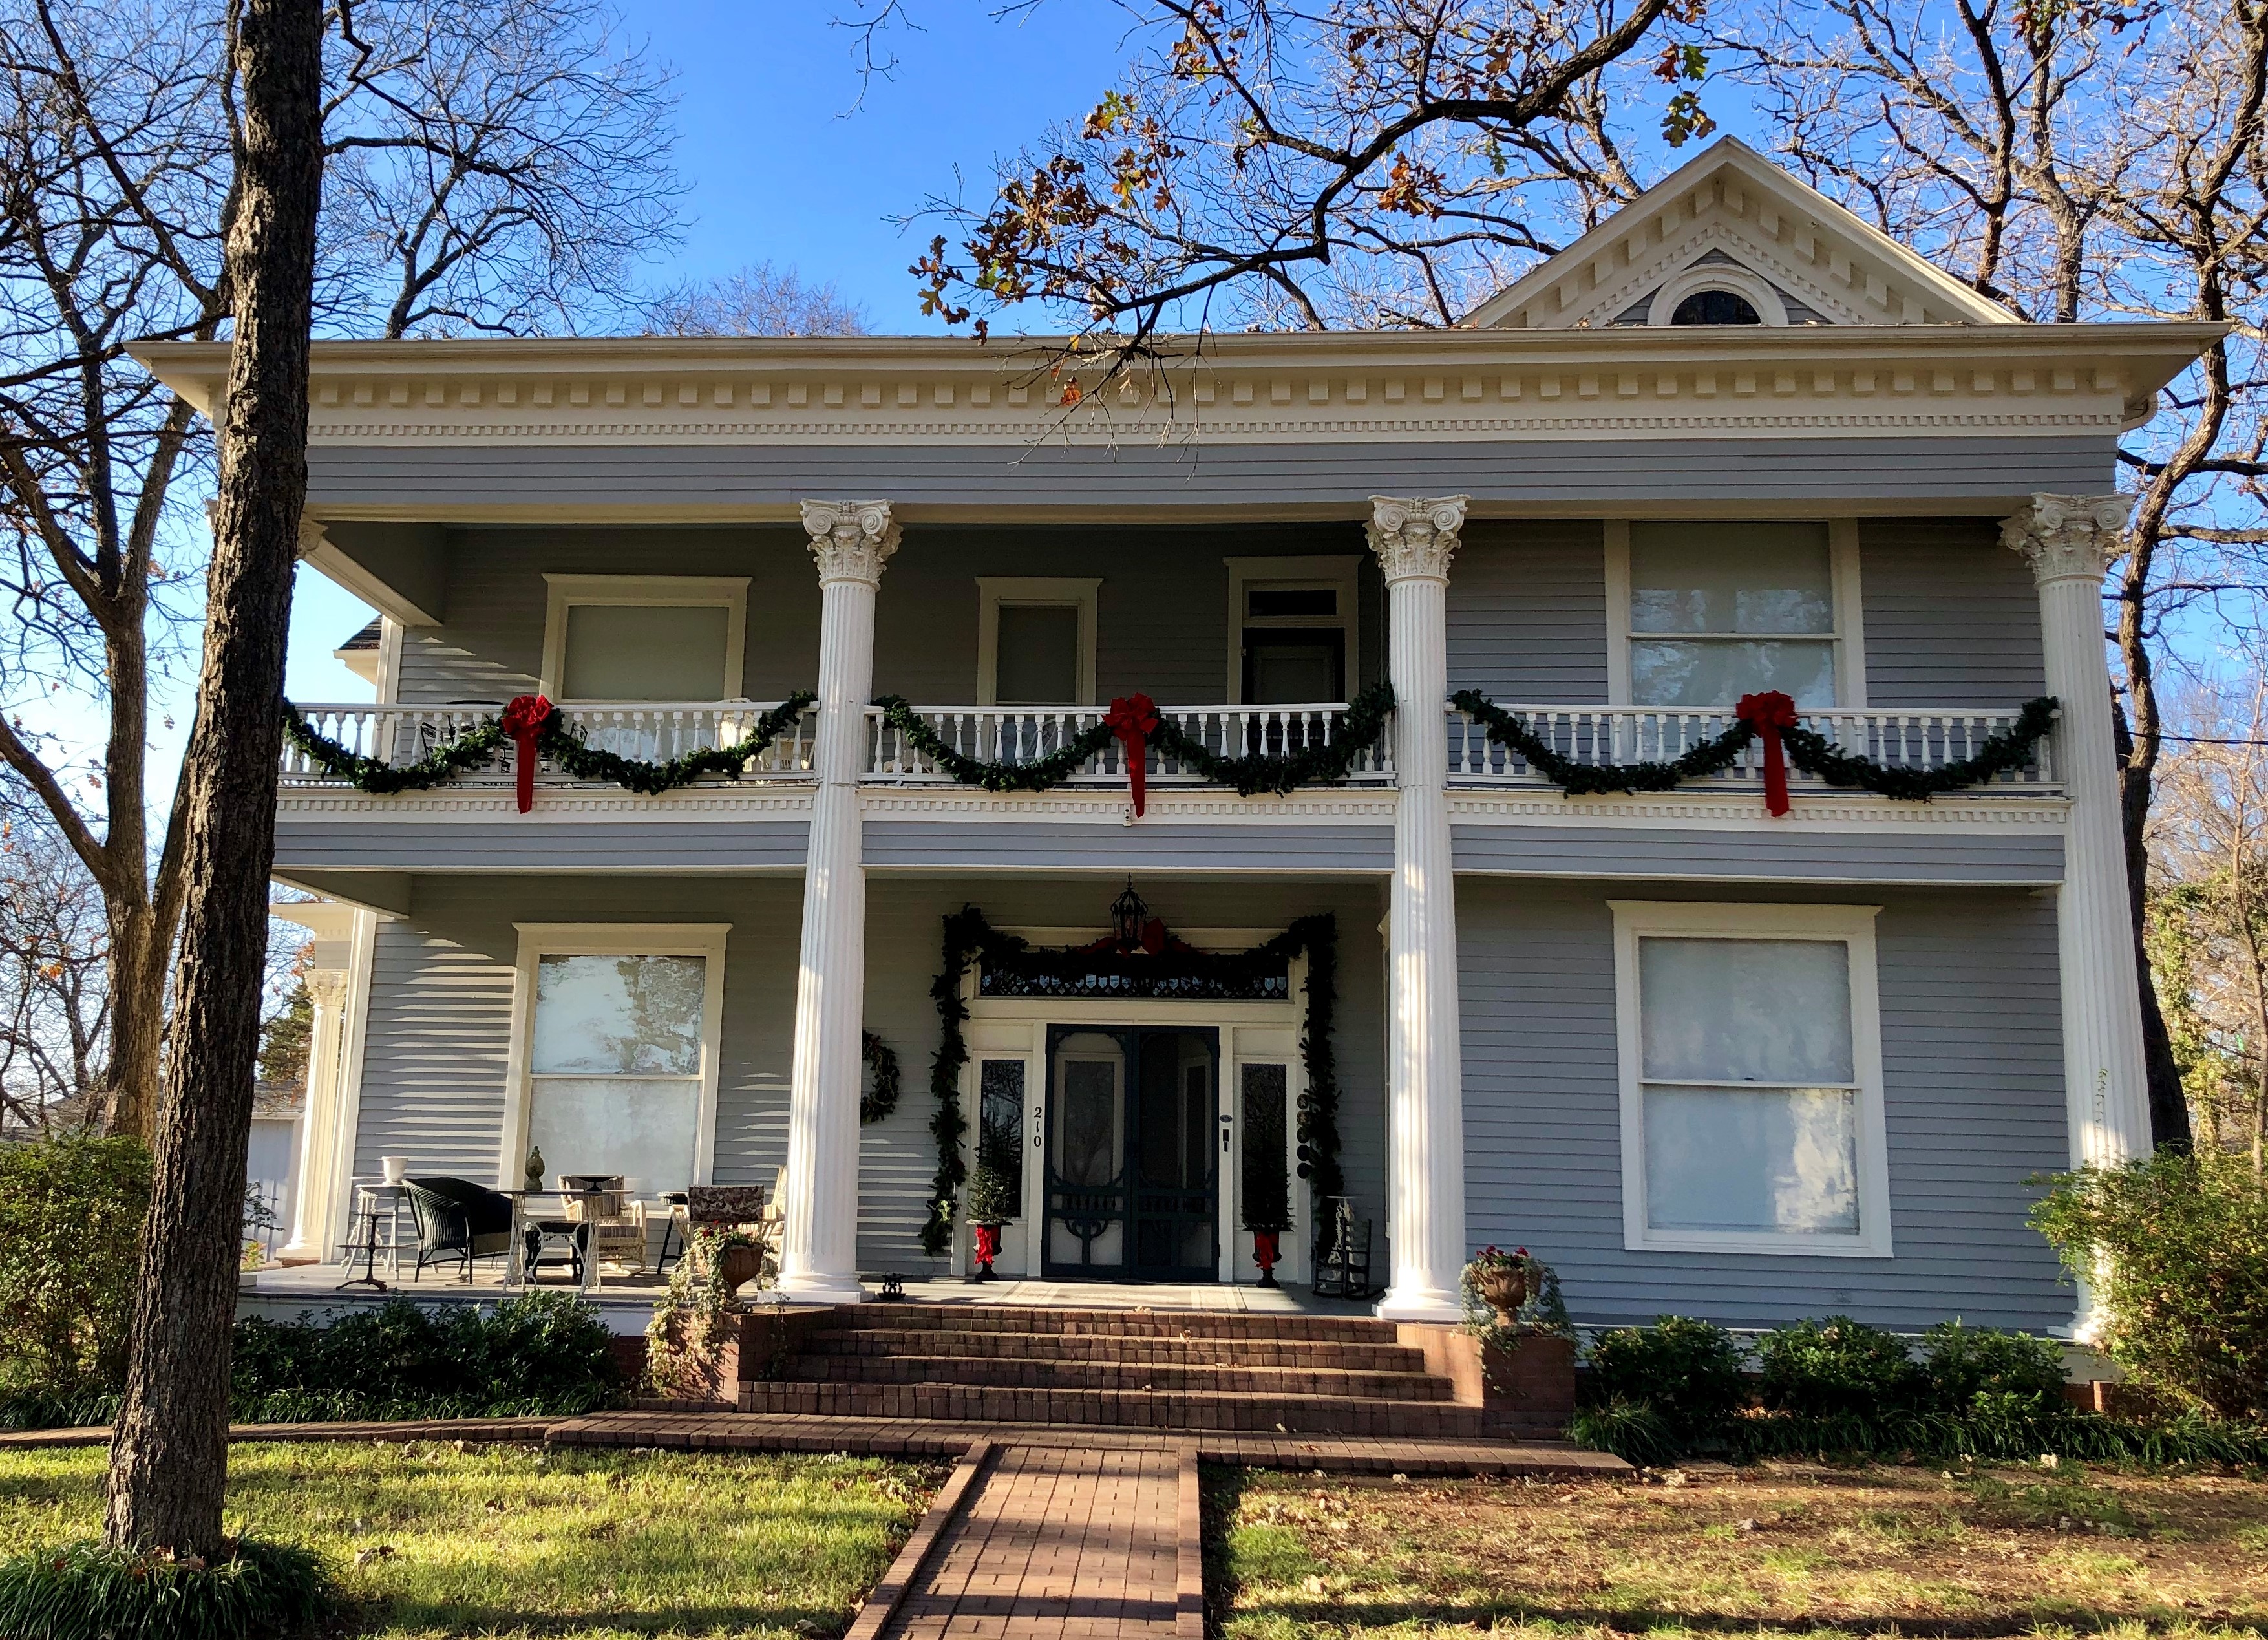 1st Annual Historic Waxahachie Christmas Tour of Homes